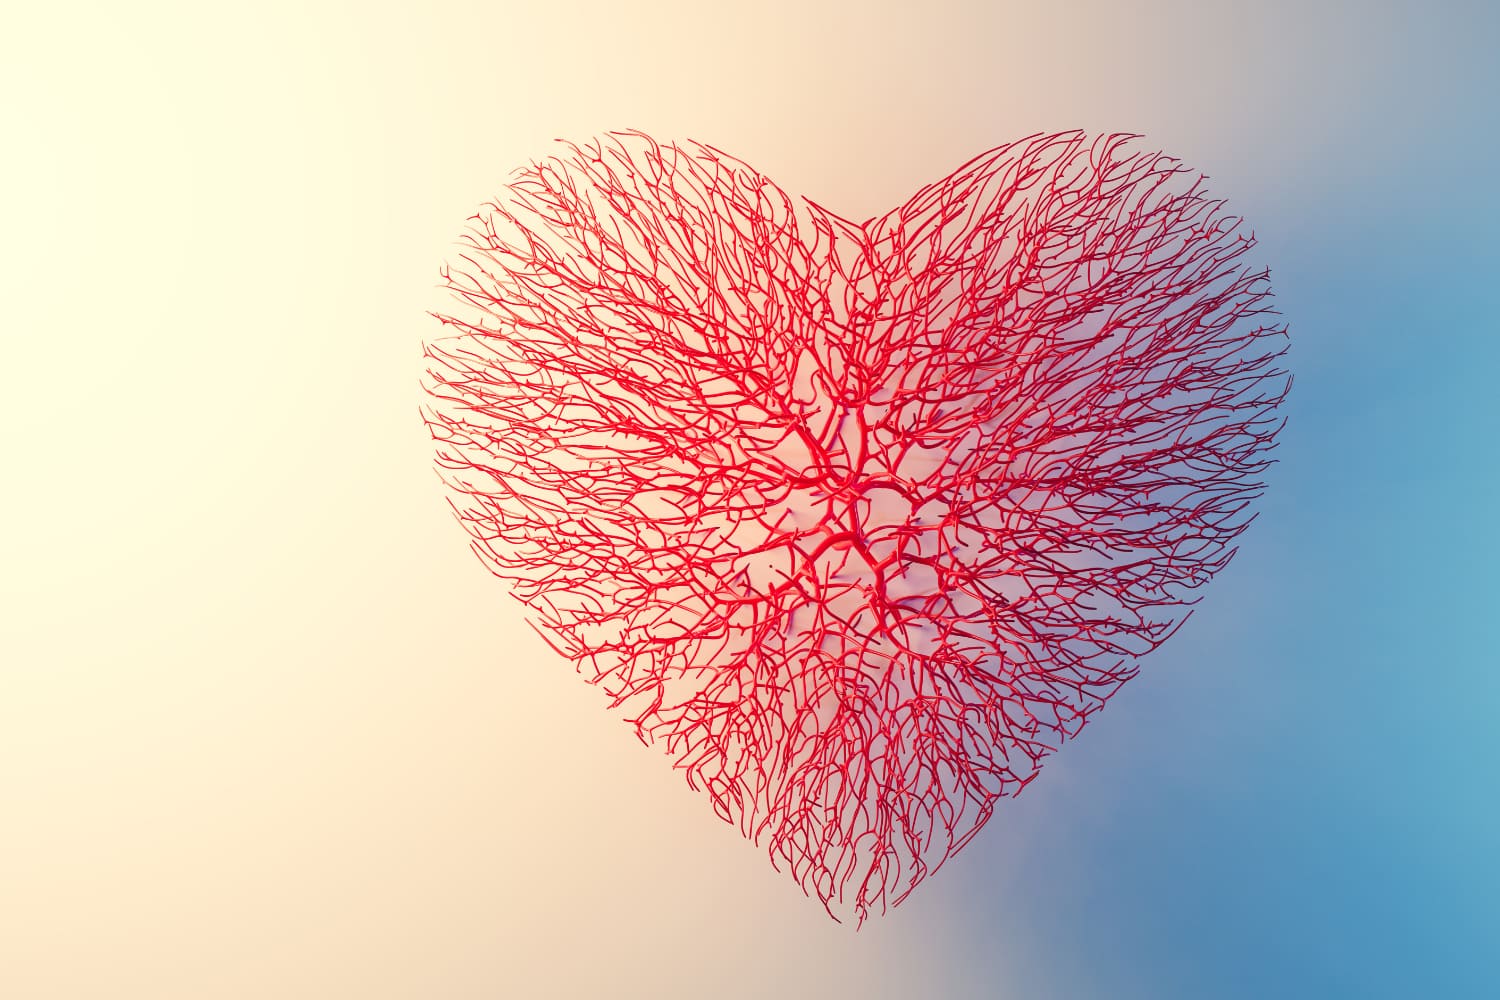 An heart made of blood vessels